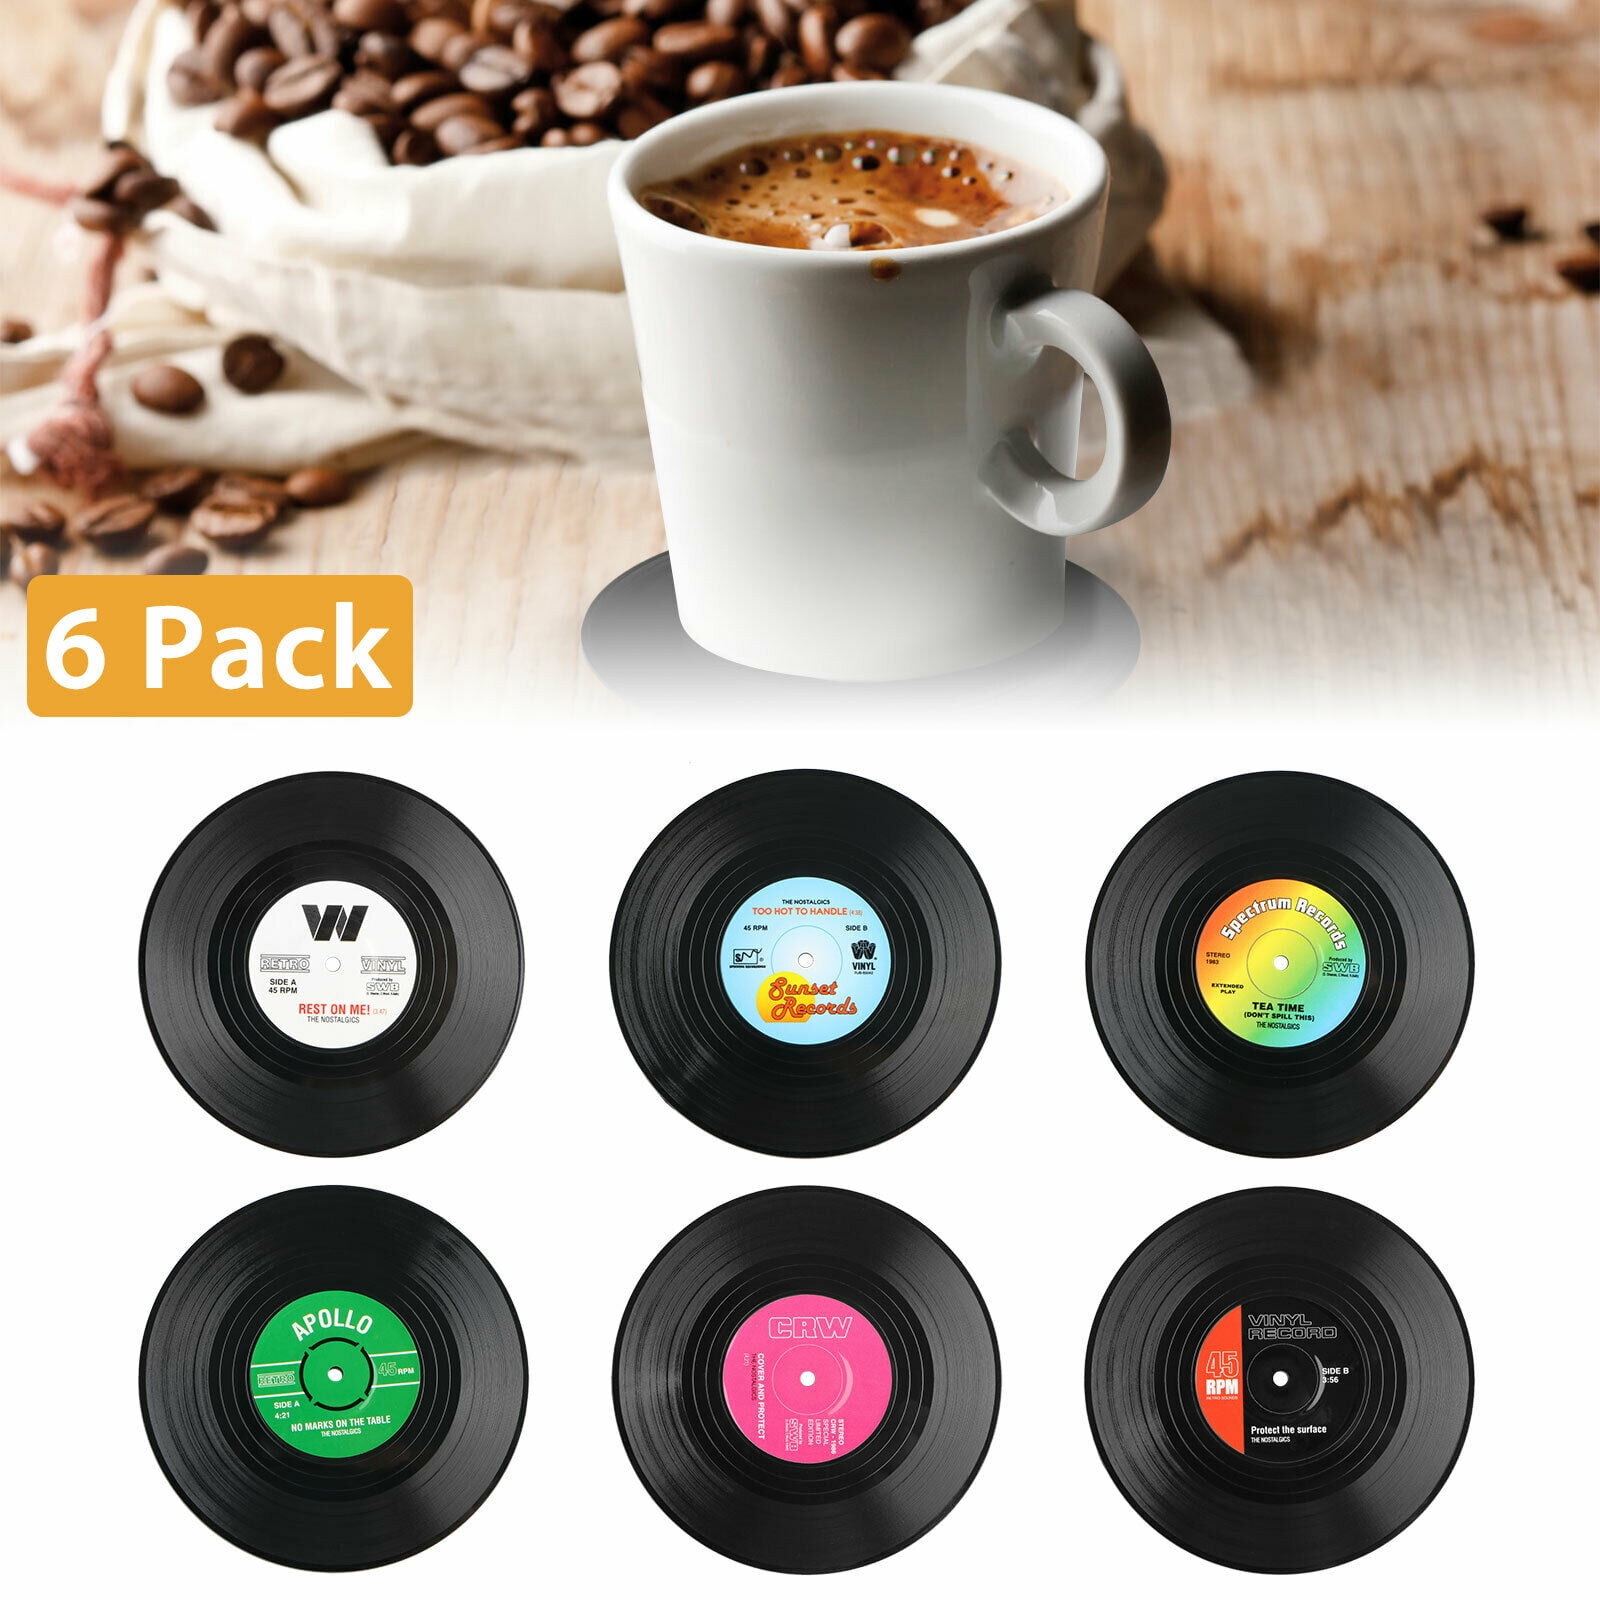 2 Pack Round Drink Coasters Non-Slip Rubber Cup Pad Mat Beverage Mug Coaster 